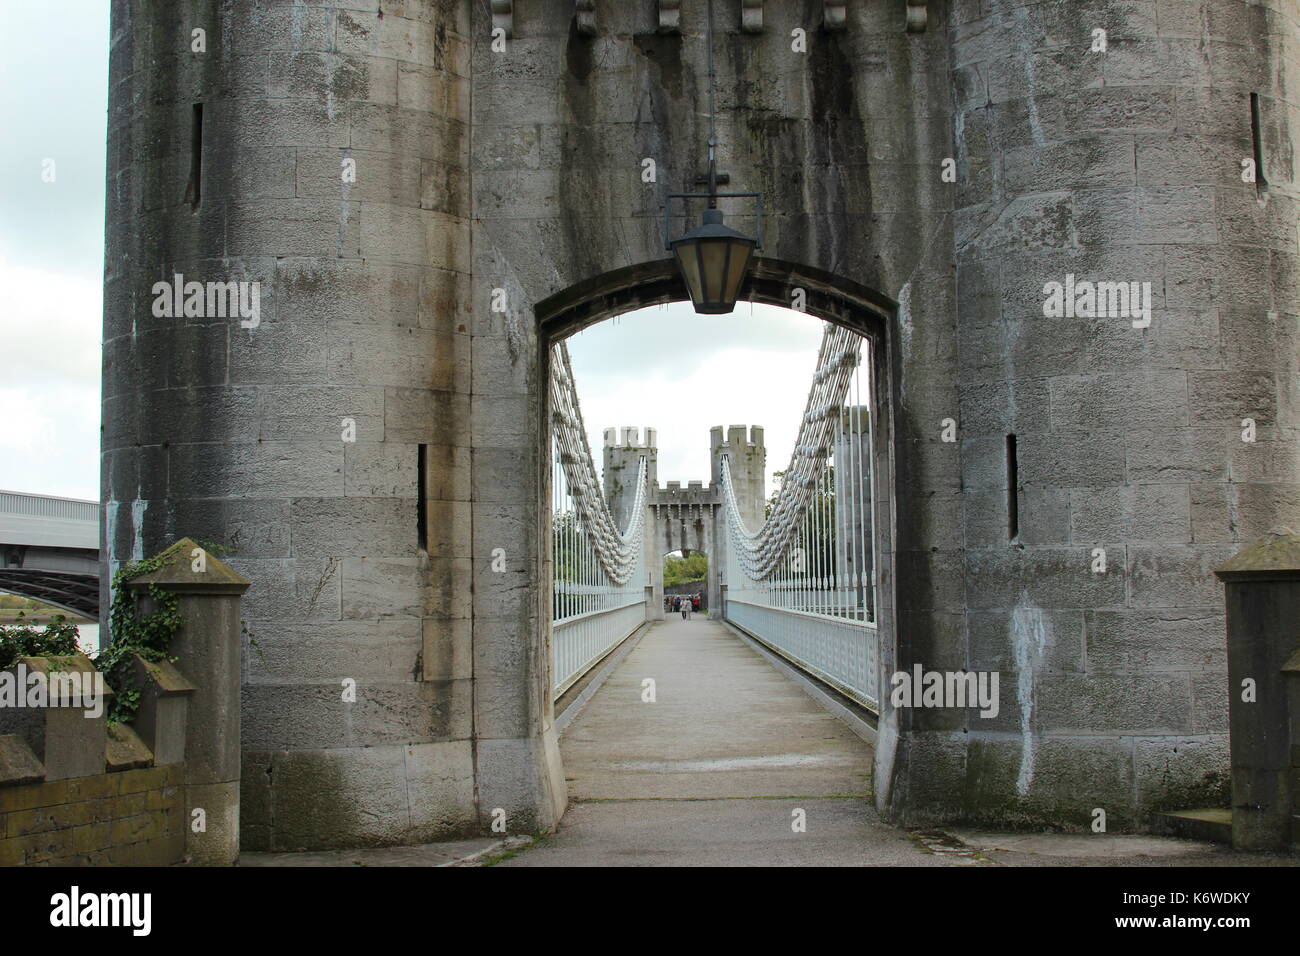 Conwy suspension bridge in wales. Built by Thomas Telford in 1822-26 Stock Photo